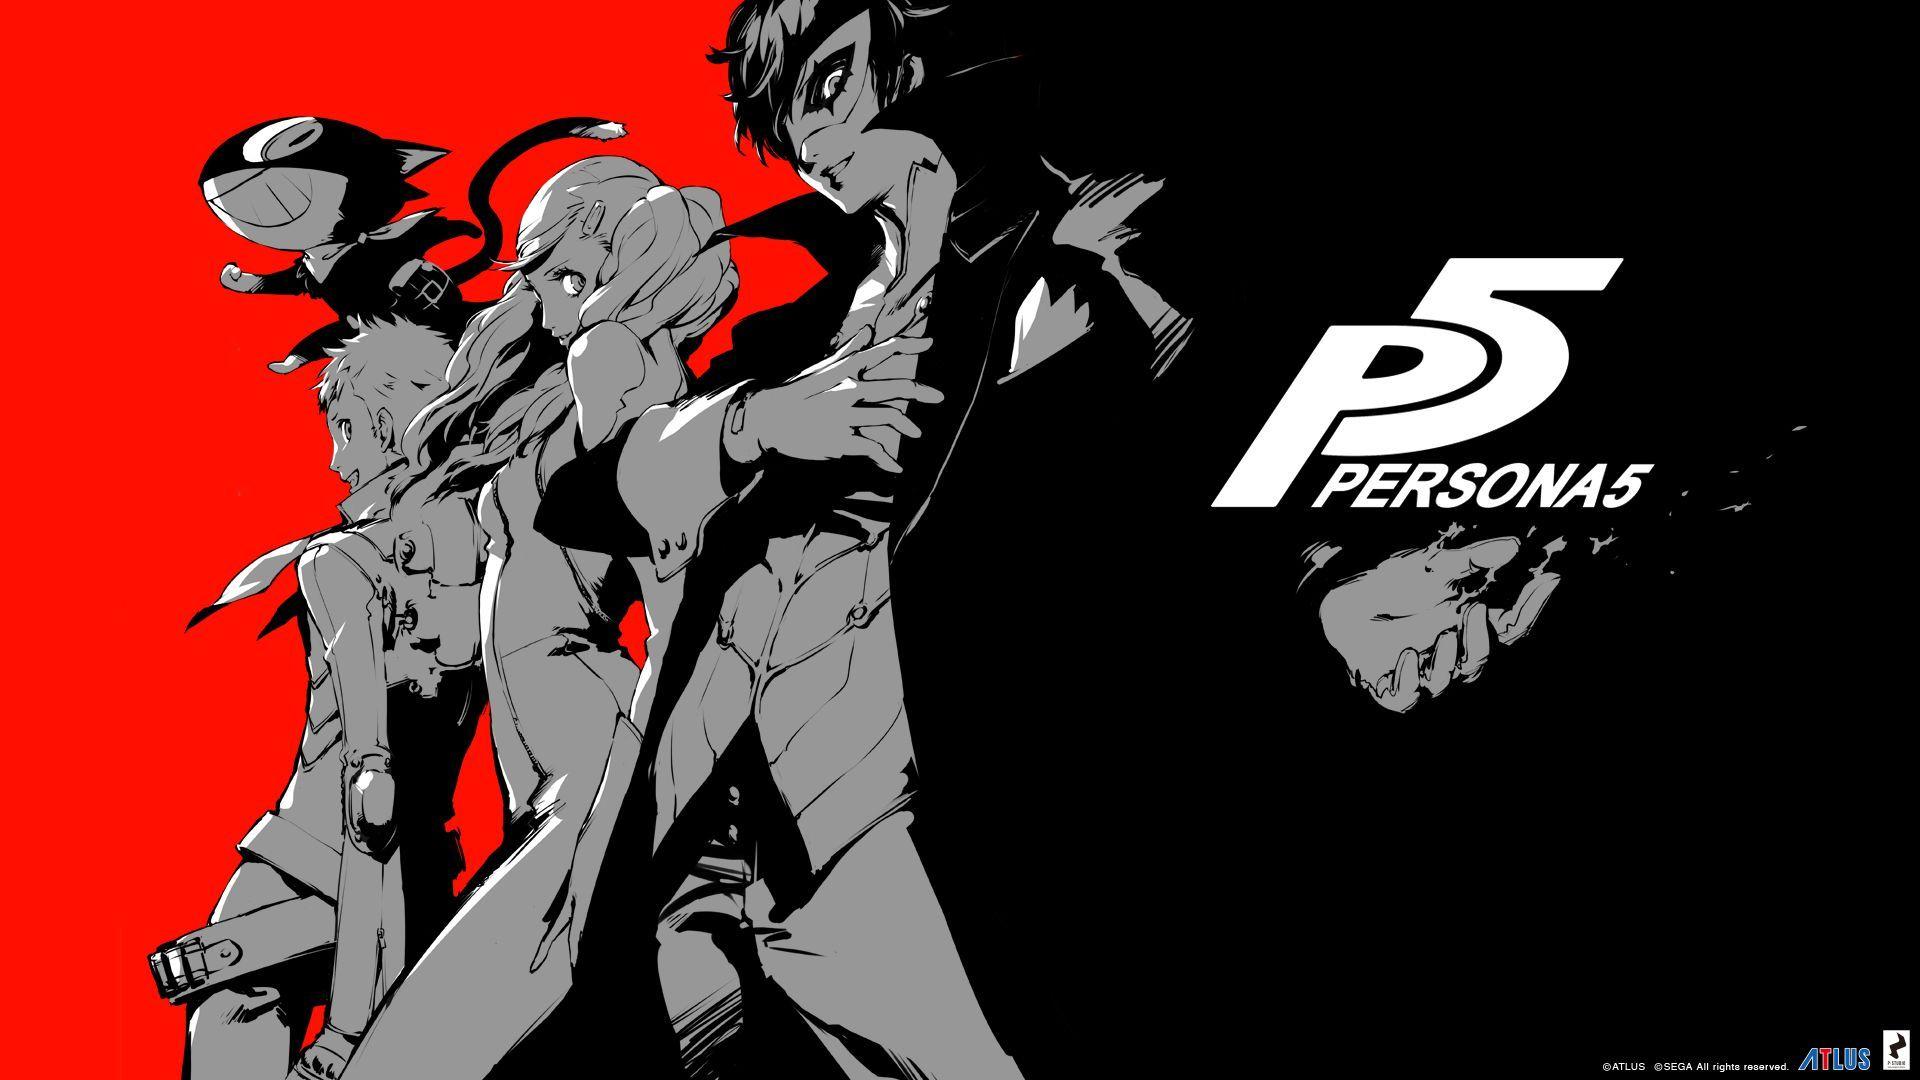 Persona 5 Set to "Take Your Heart" on Valentine&Day 2017